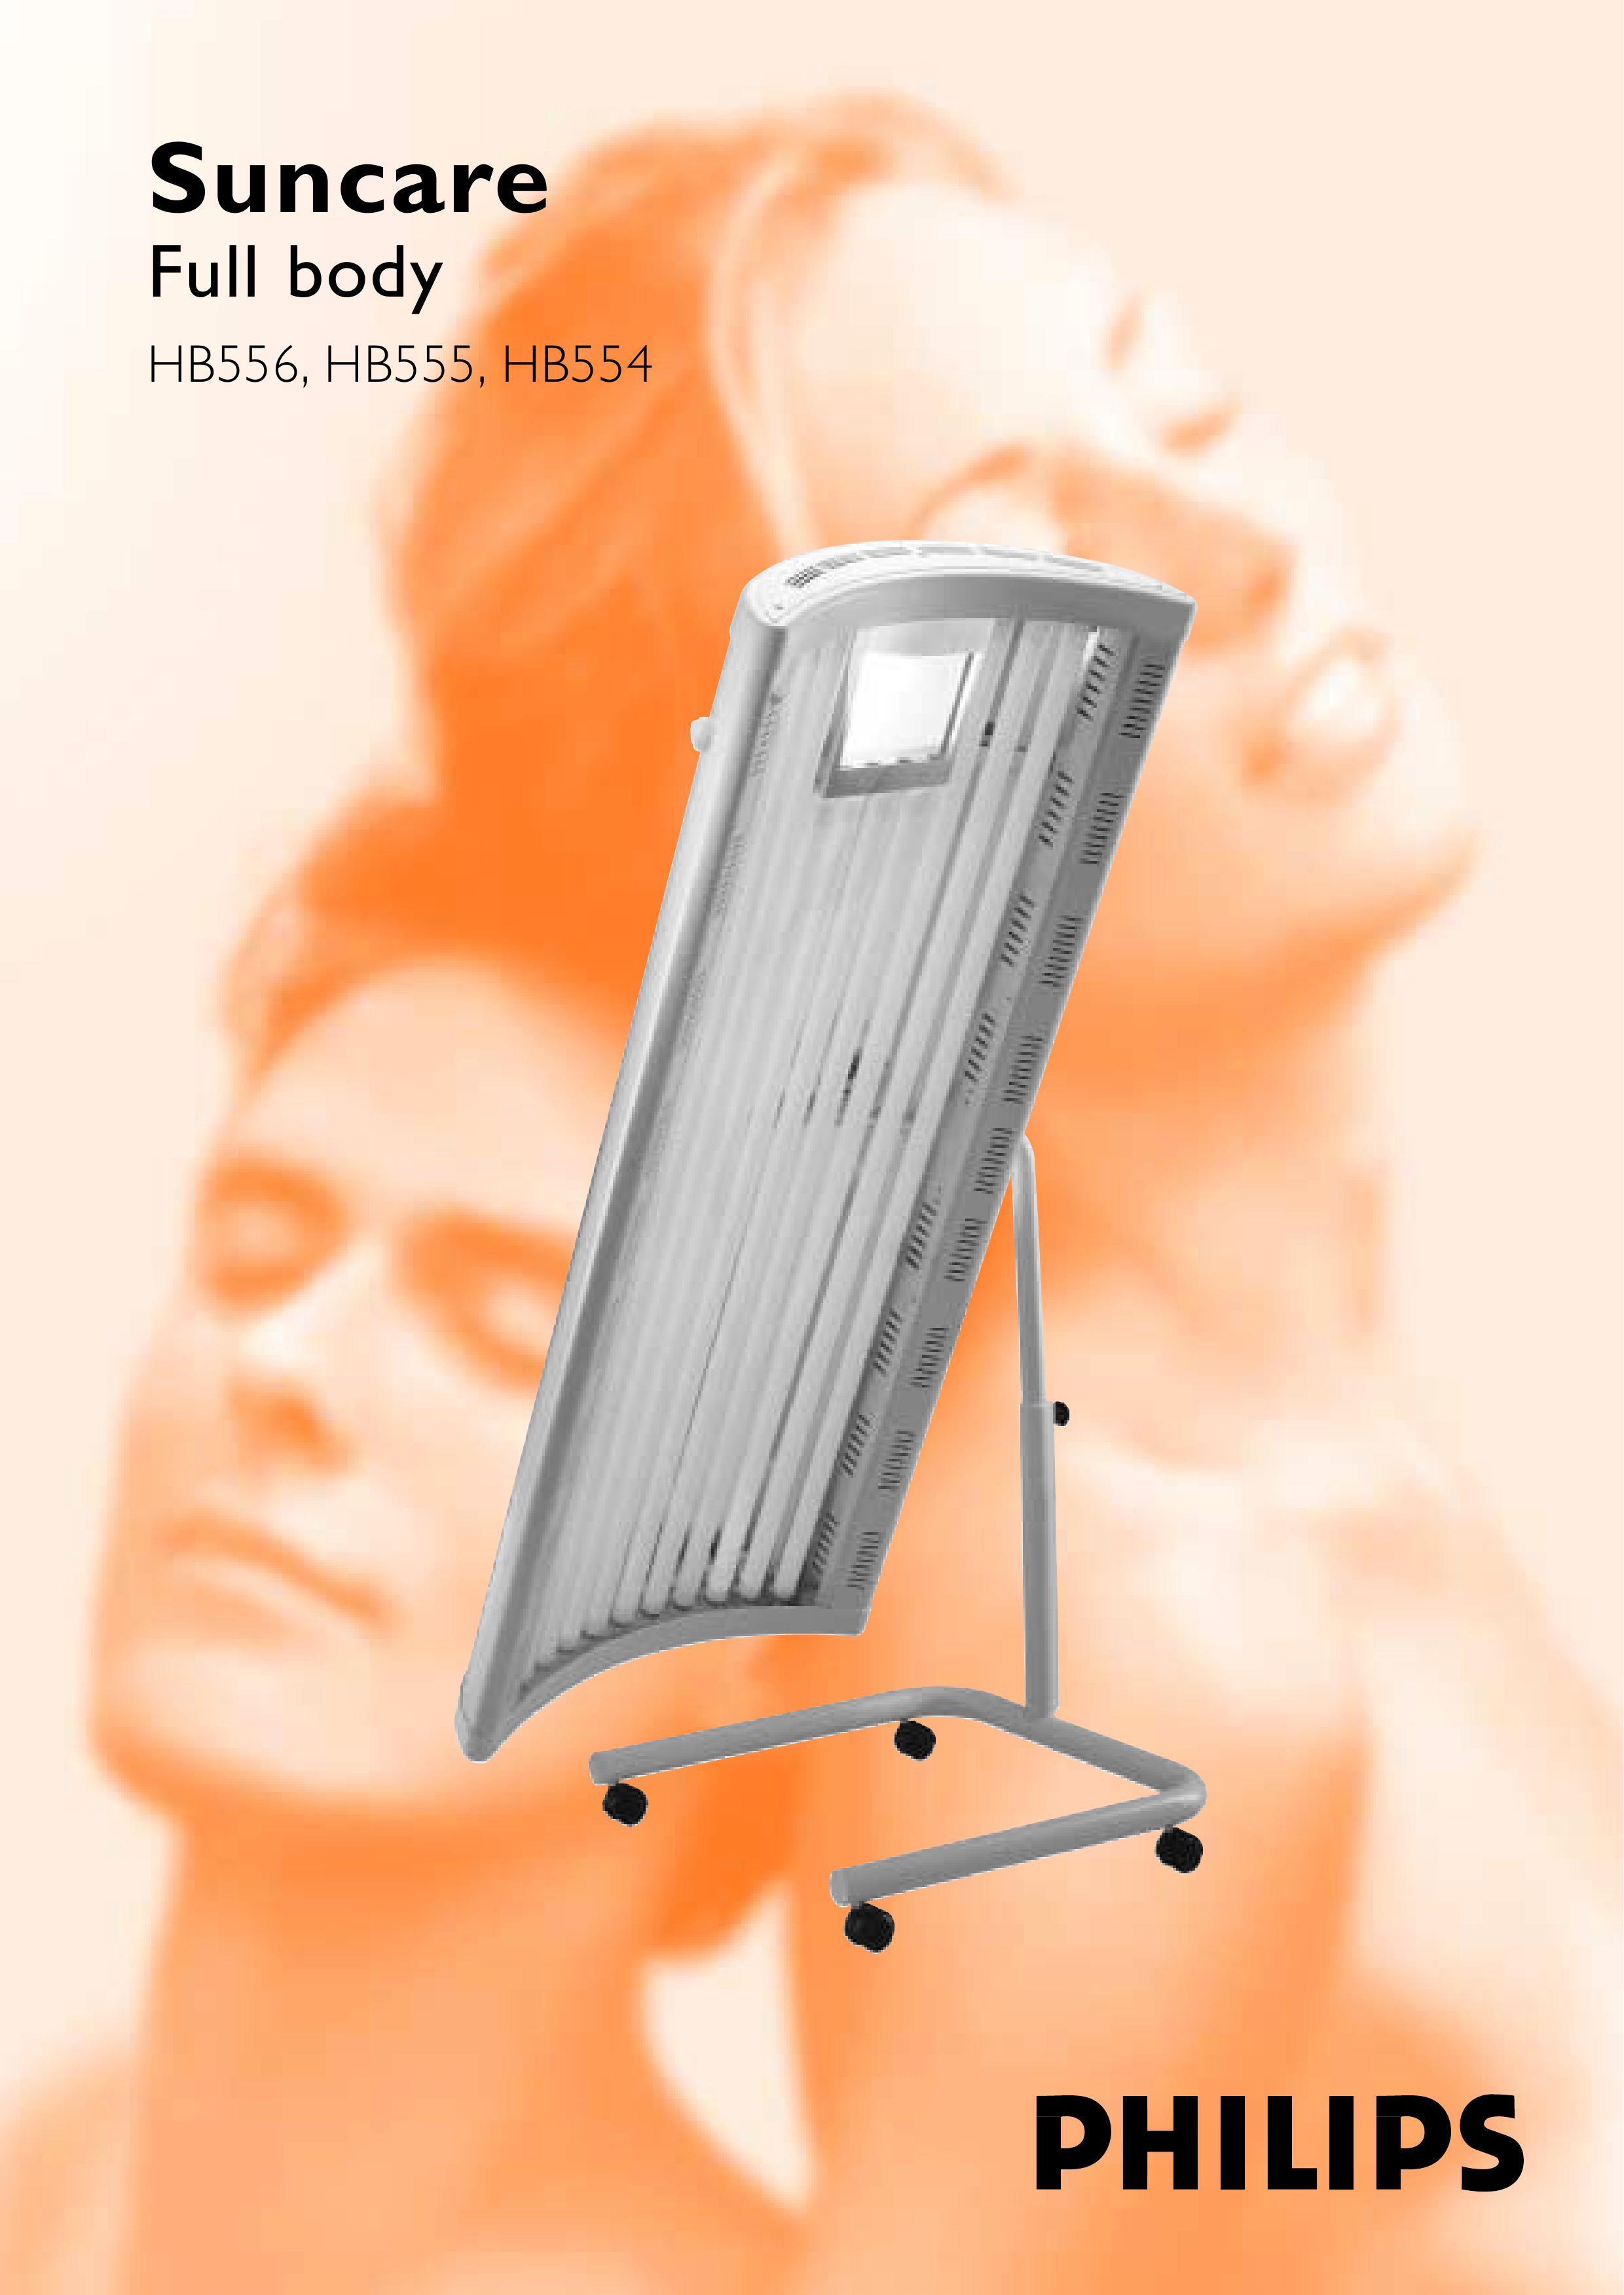 Philips HB554 Light Therapy Device User Manual